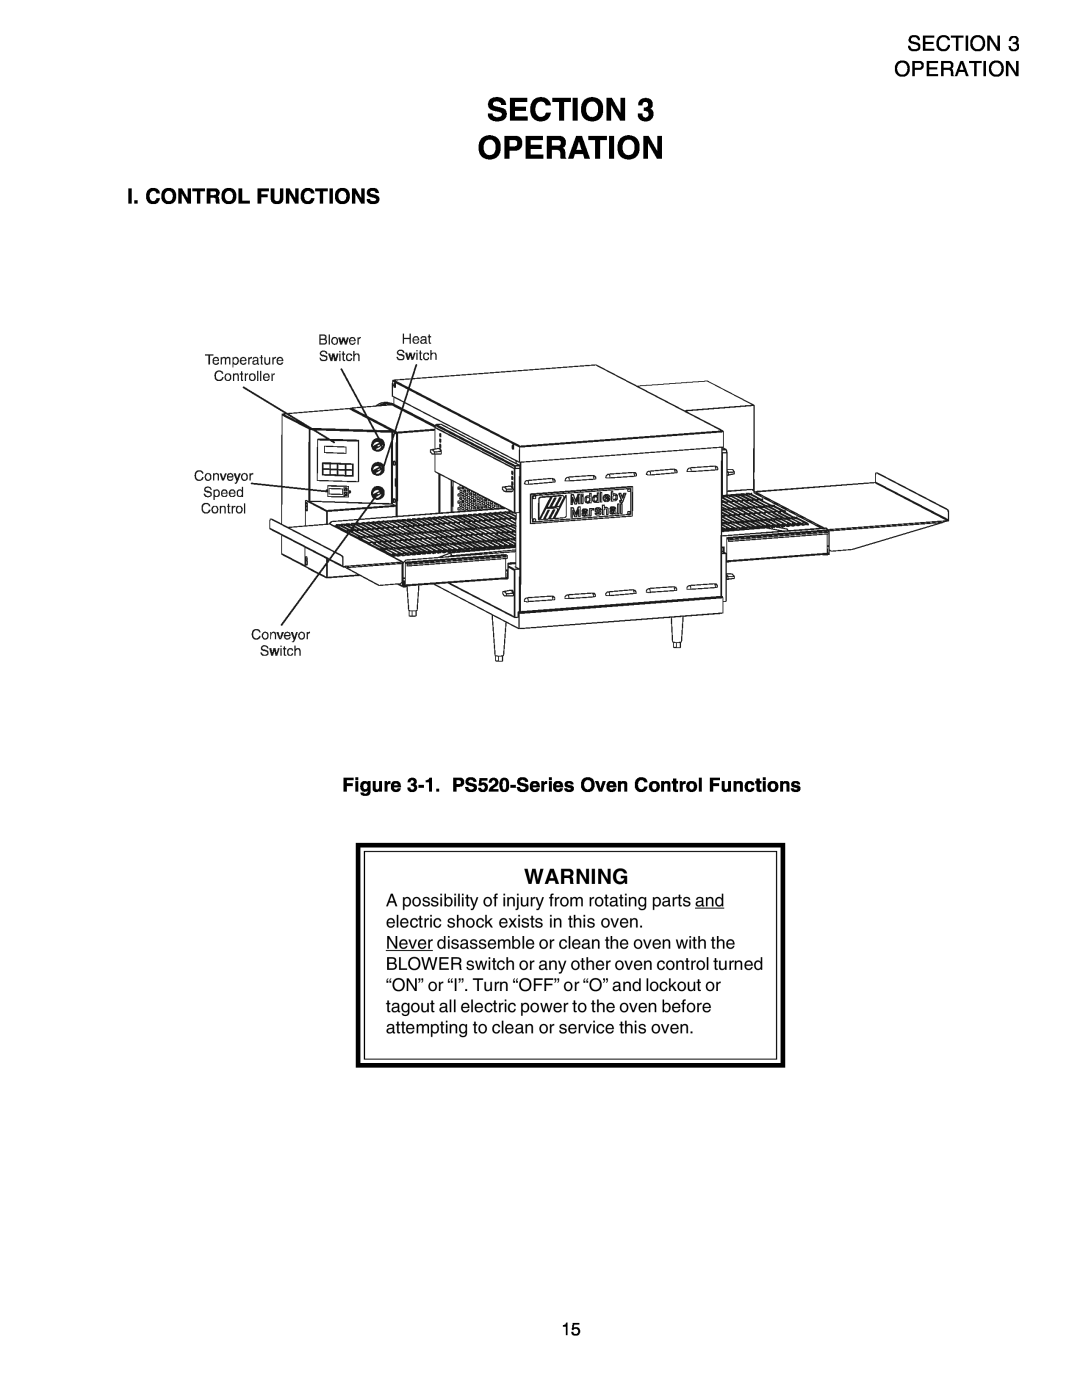 Middleby Marshall installation manual Section Operation, I. Control Functions, 1. PS520-SeriesOven Control Functions 